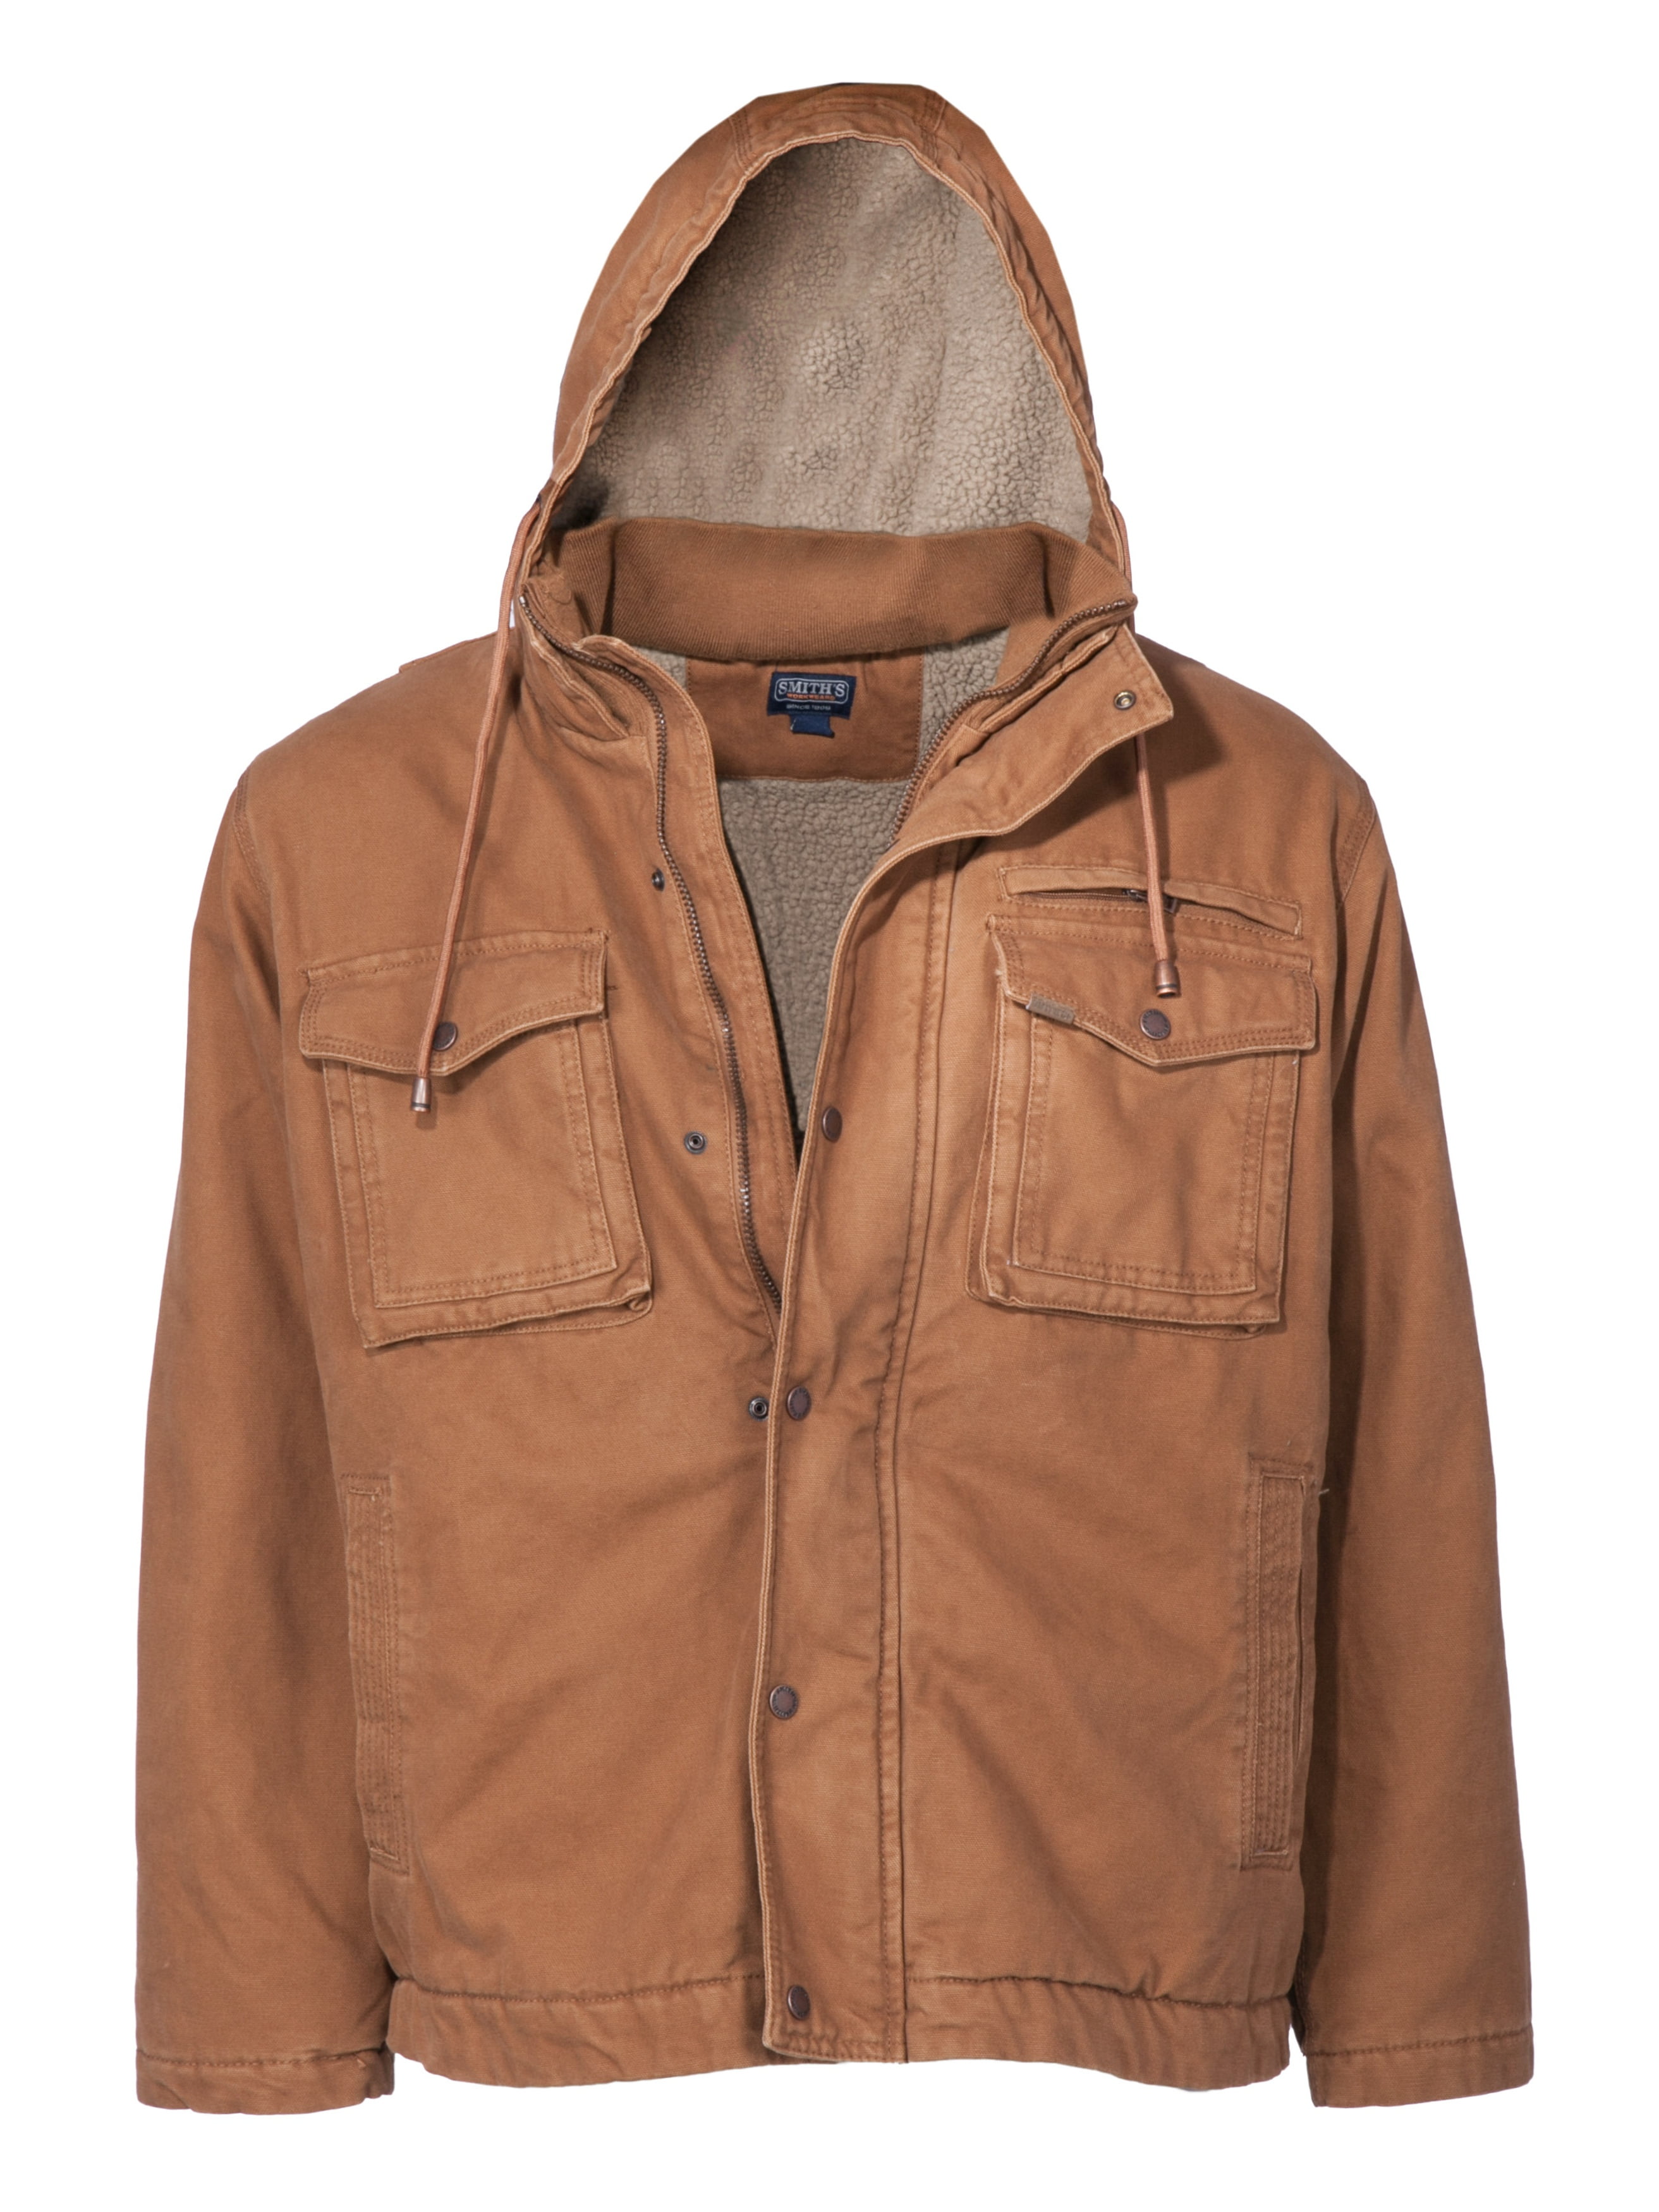 Smith's Workwear - Sherpa-Lined Duck Canvas Hooded Work Jacket